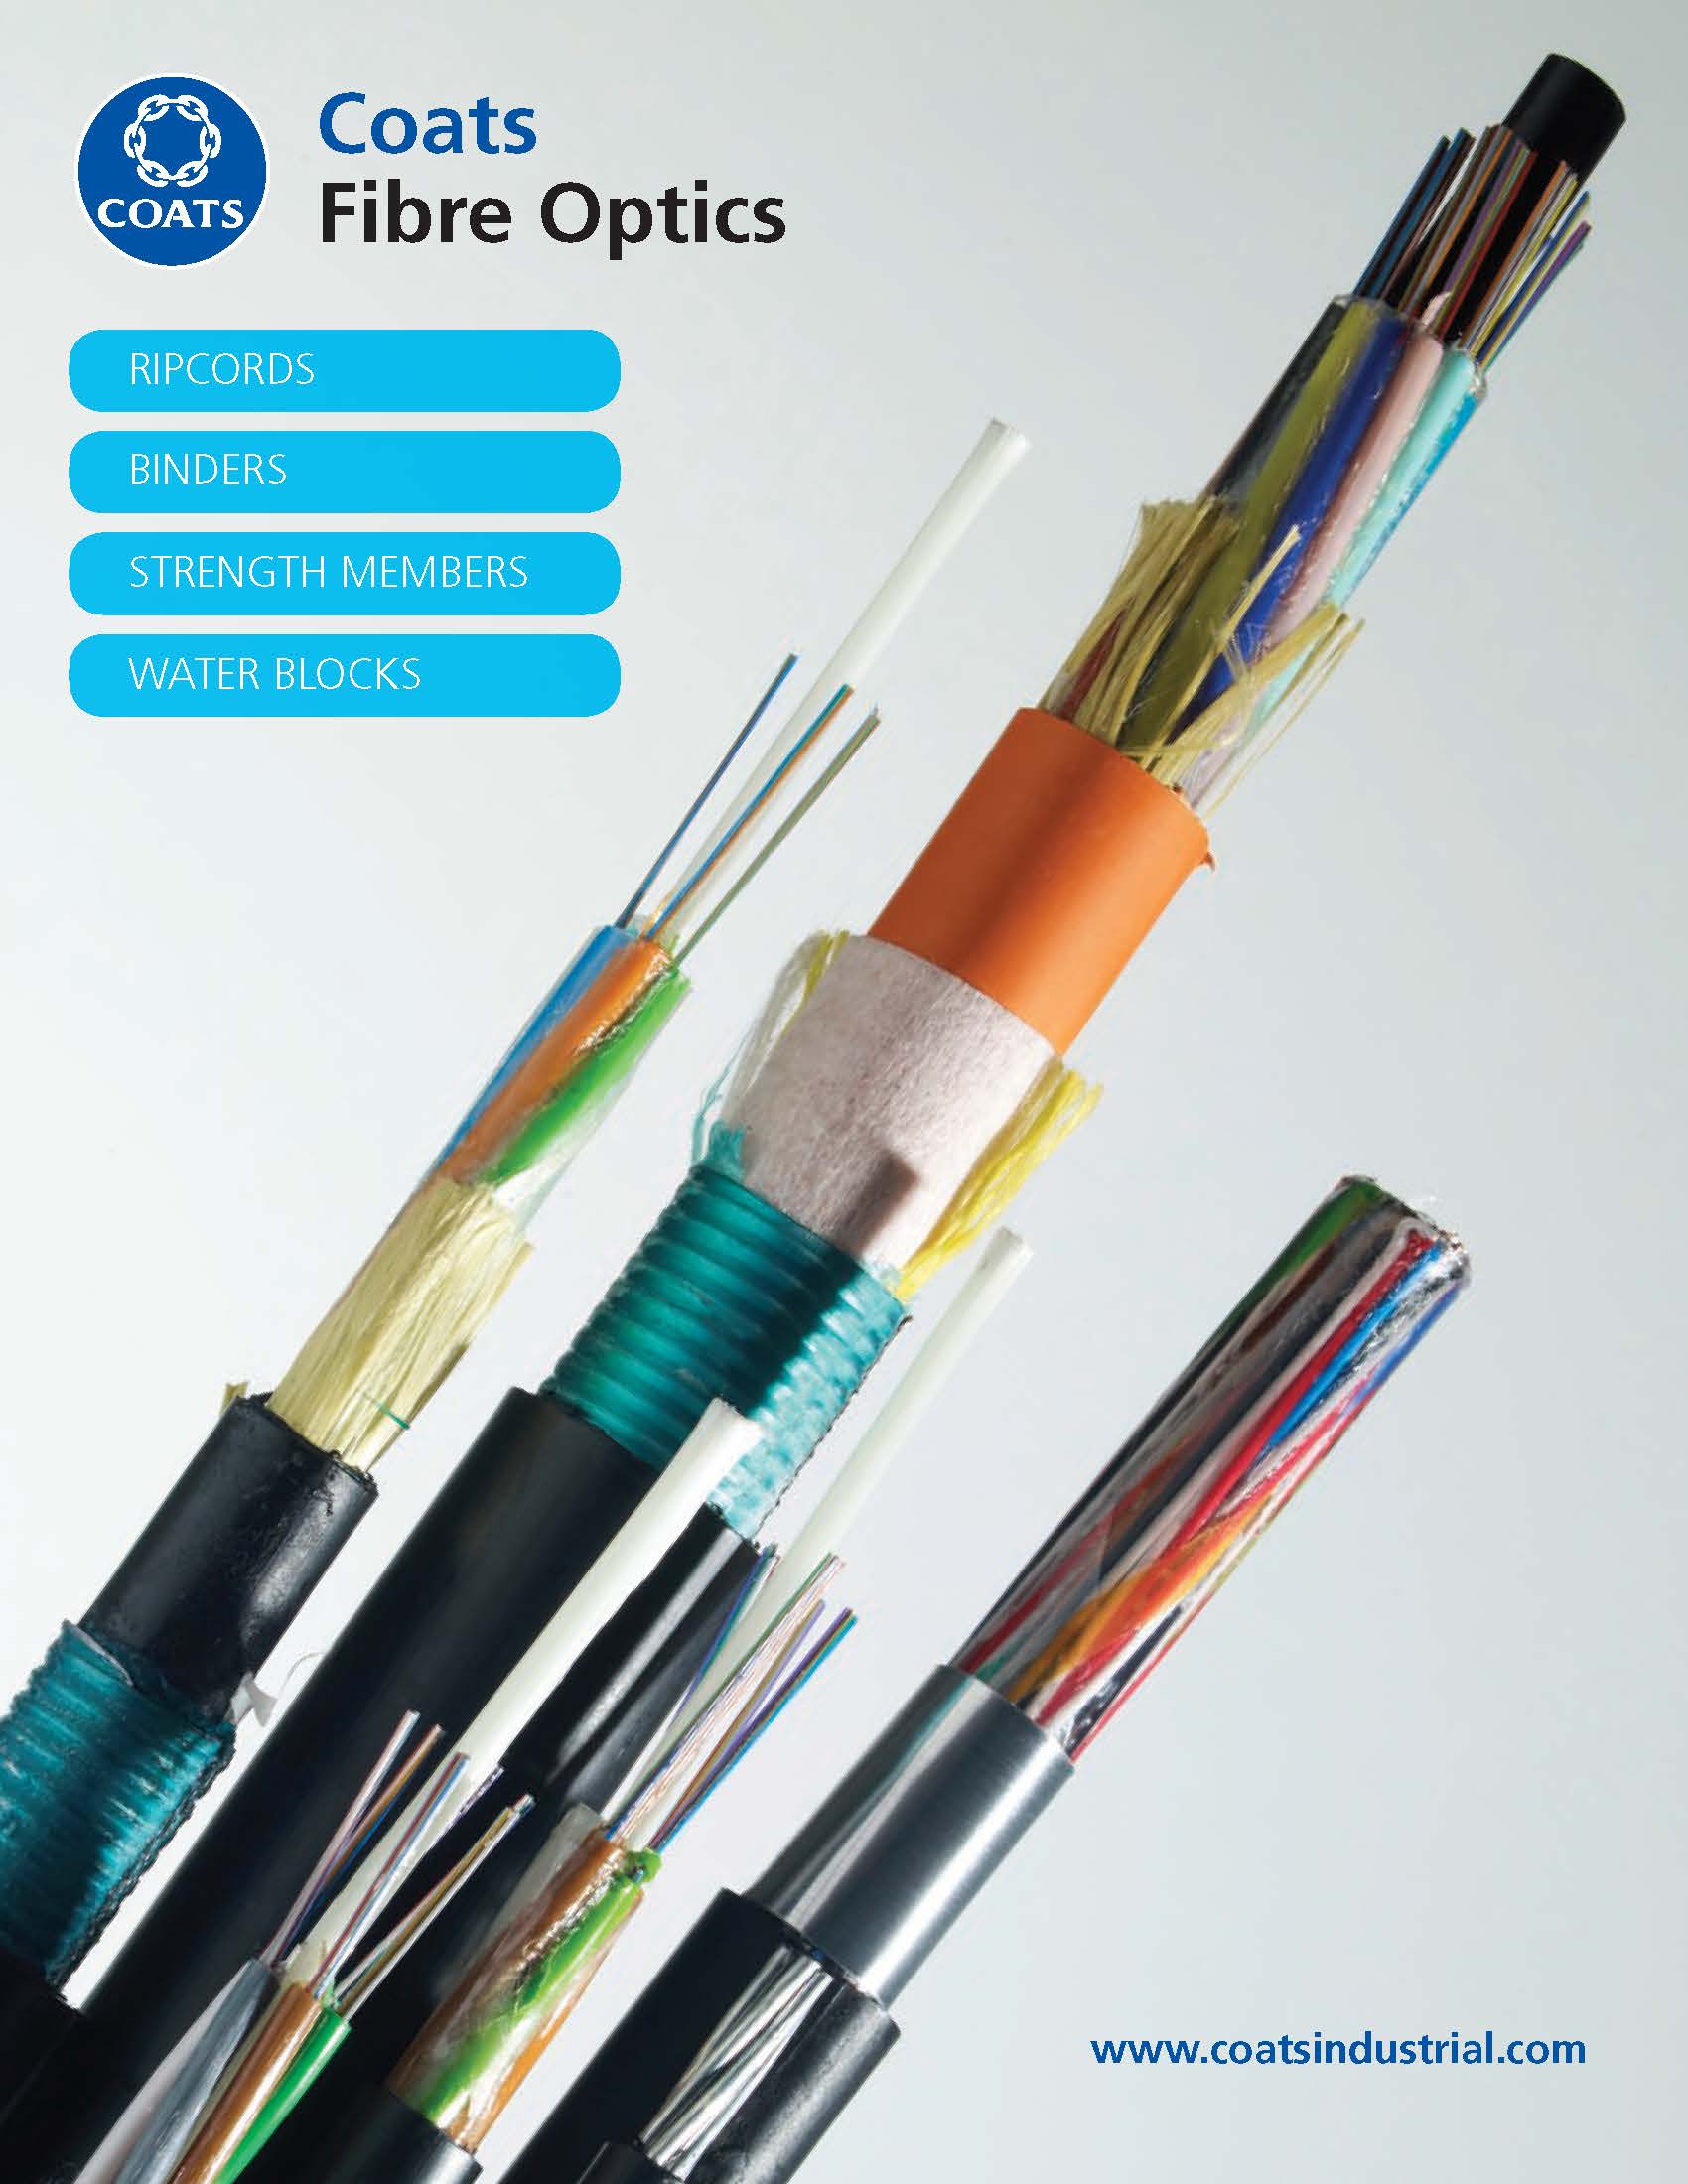 Coats_Wire_Cable_Brochure_9_15_15_final_lowres_Page_1